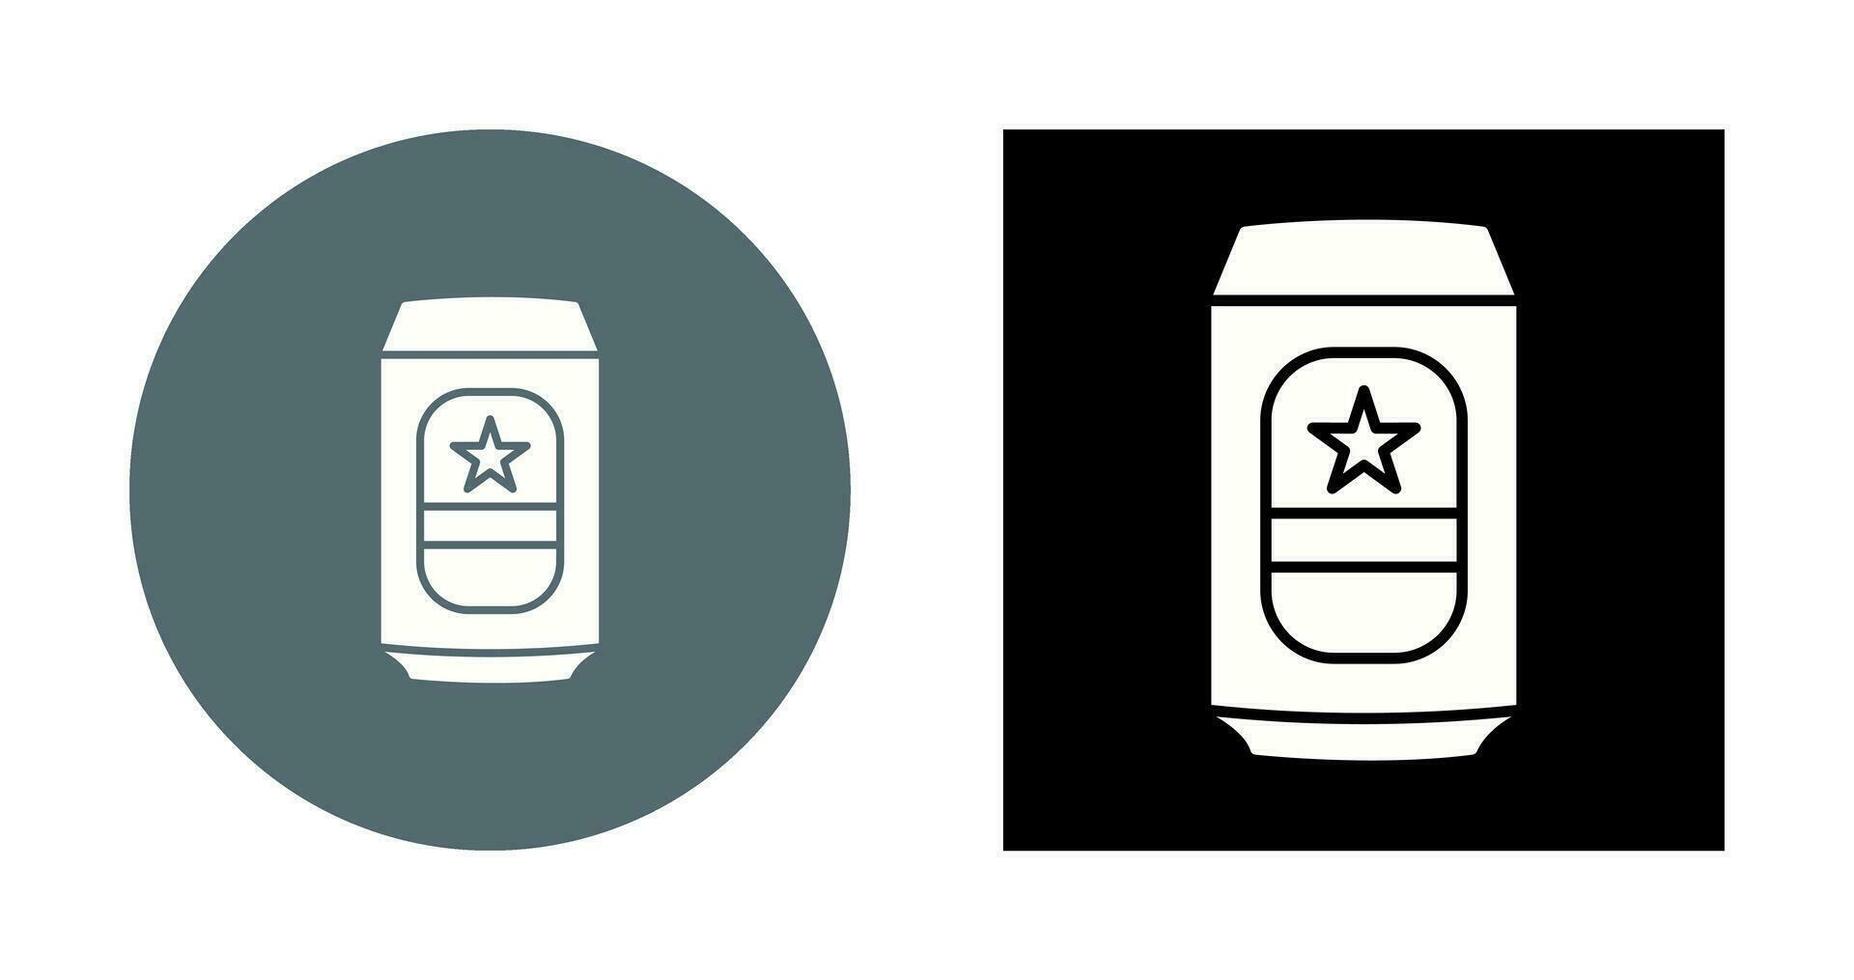 Beer Can Vector Icon